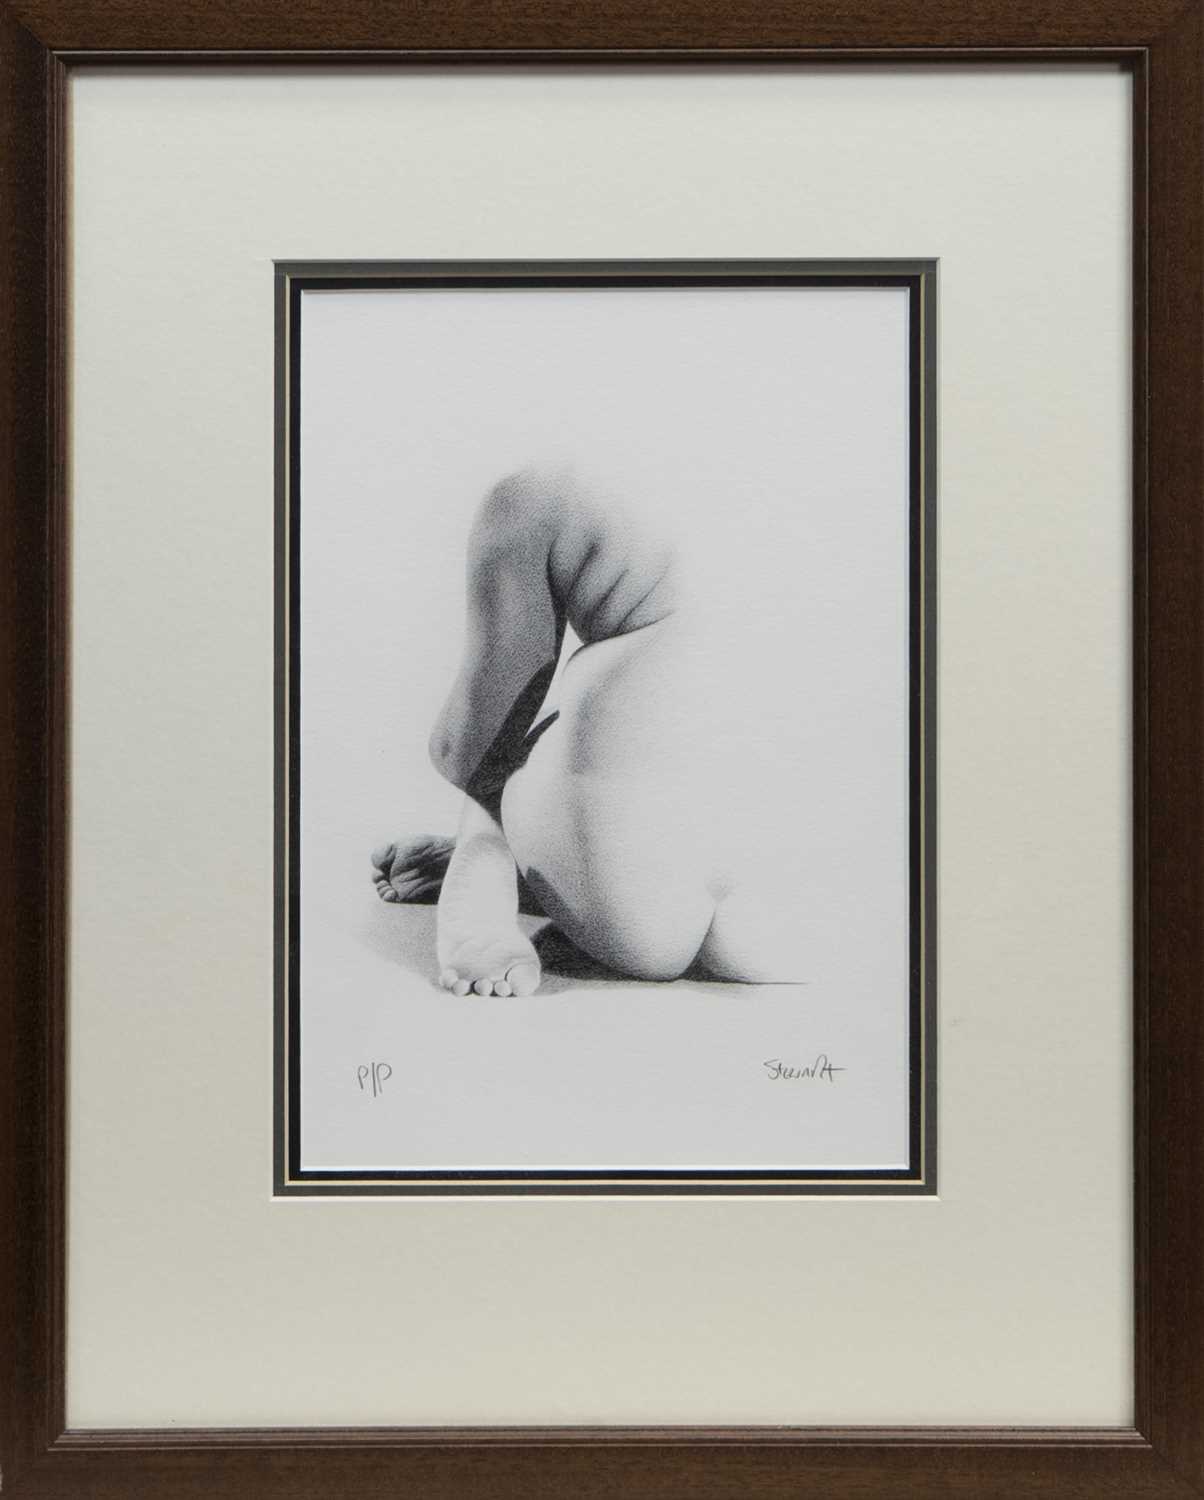 Lot 83 - NUDE STUDY, A PRINT BY LEE STEWART